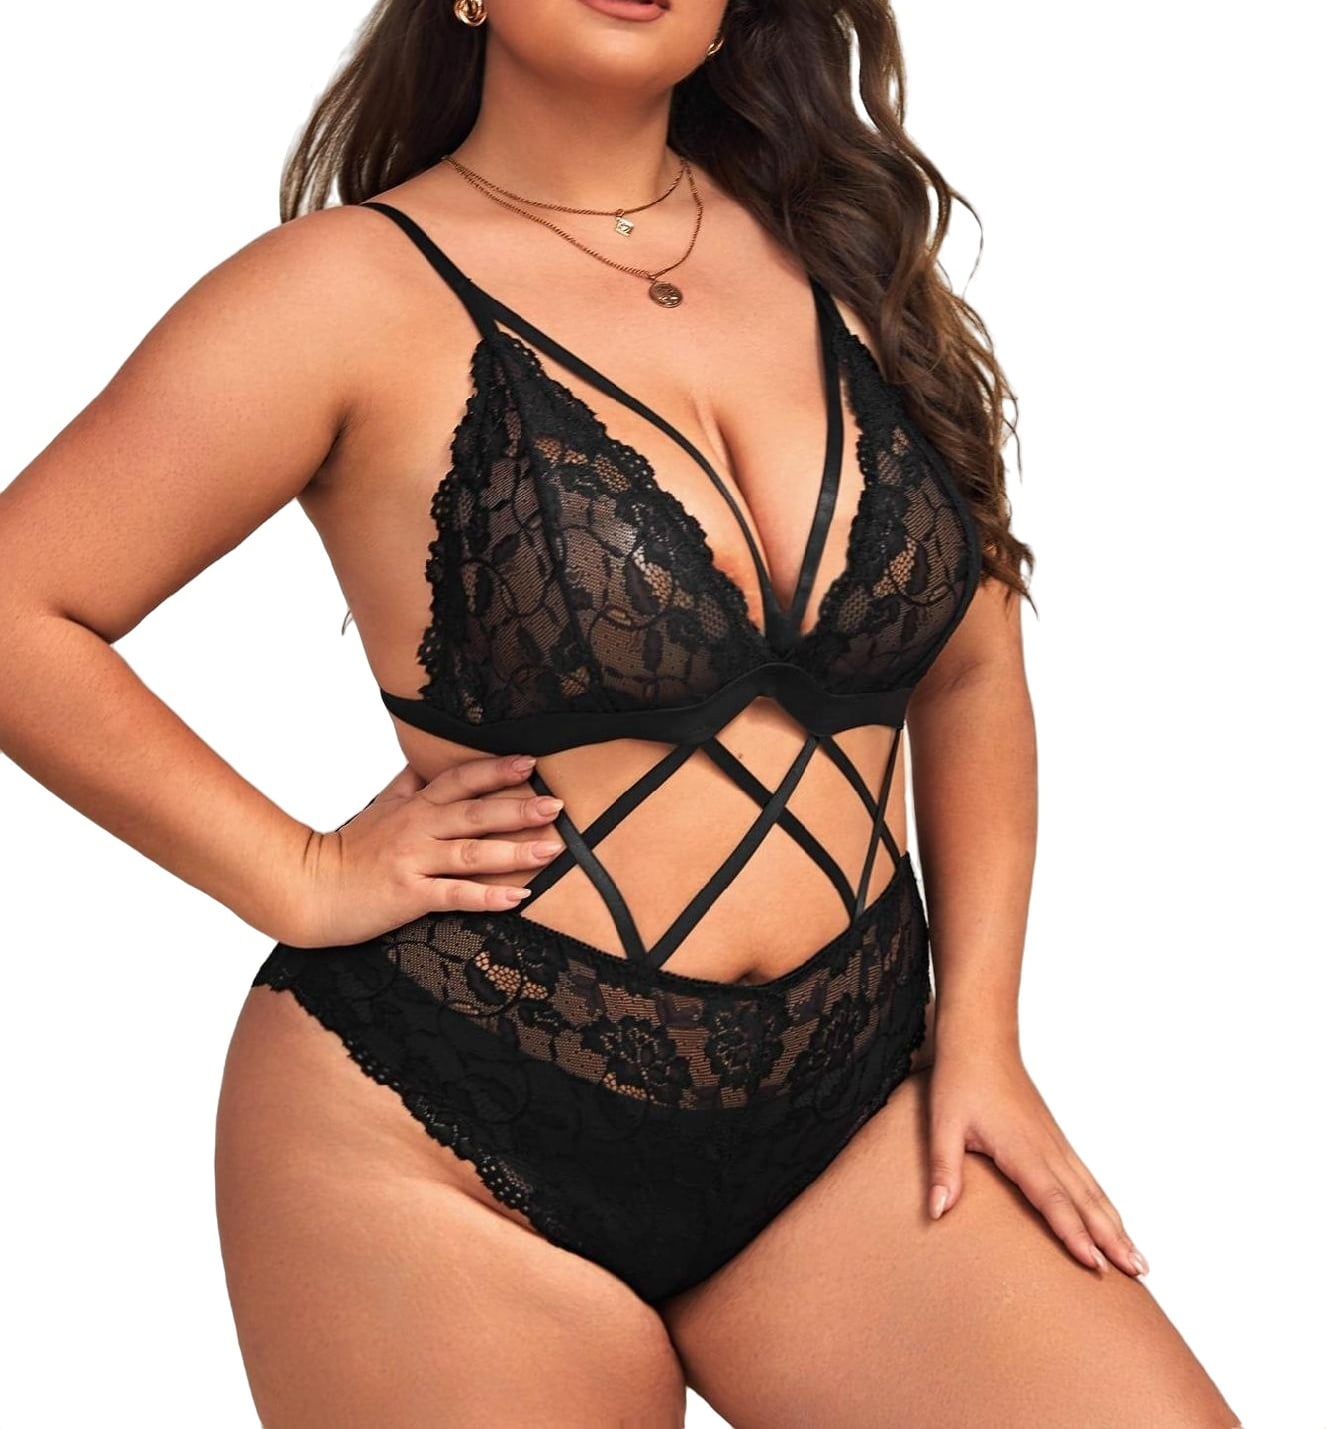 Plus Size Sexy Lingerie For Women